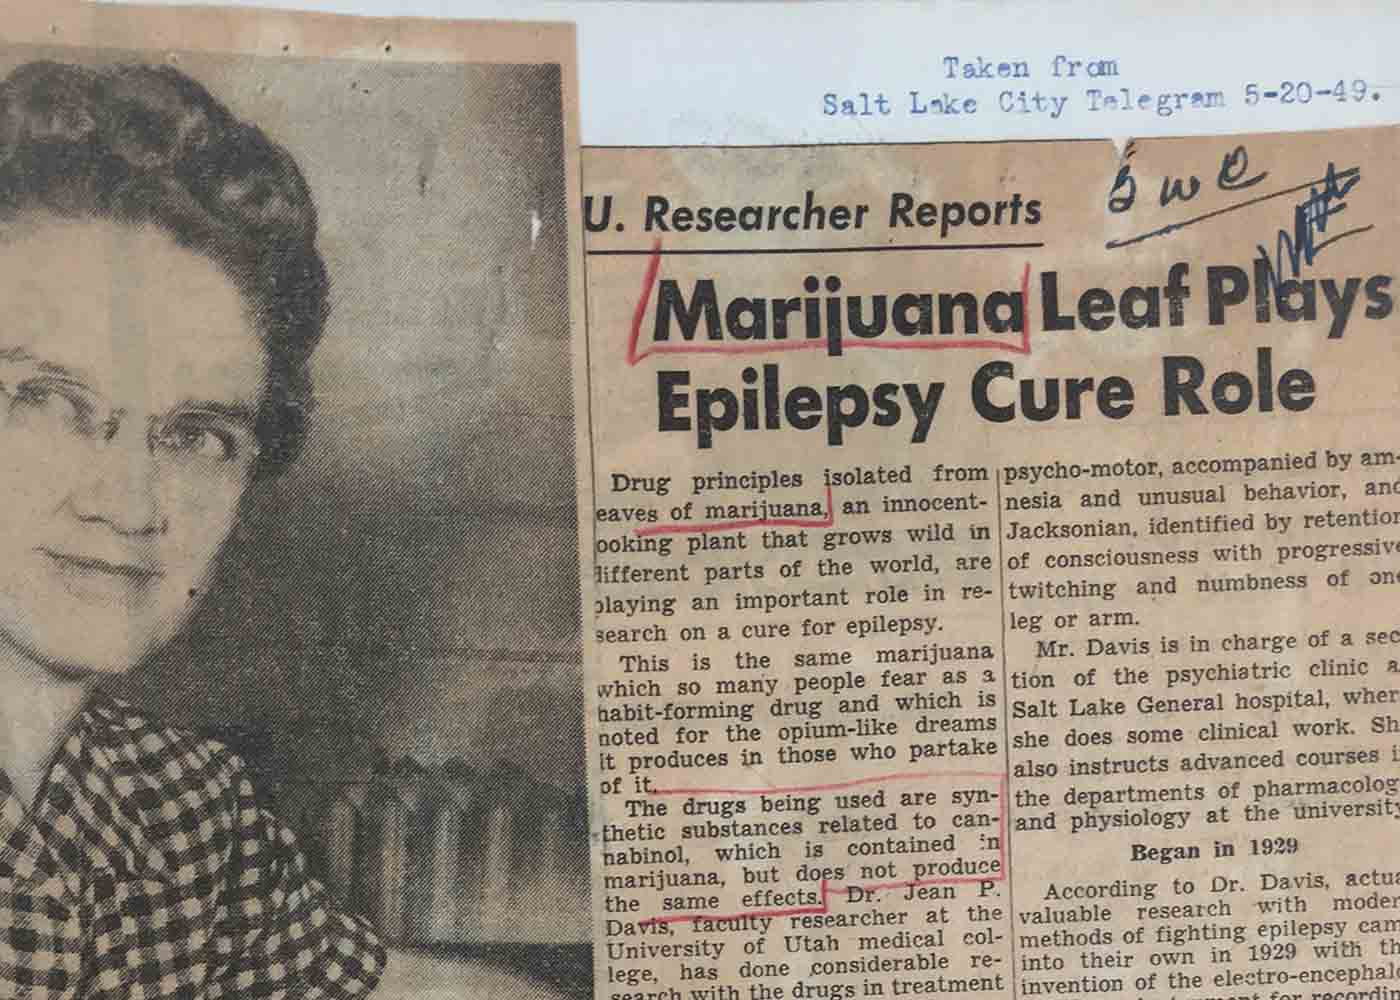 cannabis plays role in epilepsy cure since 1949